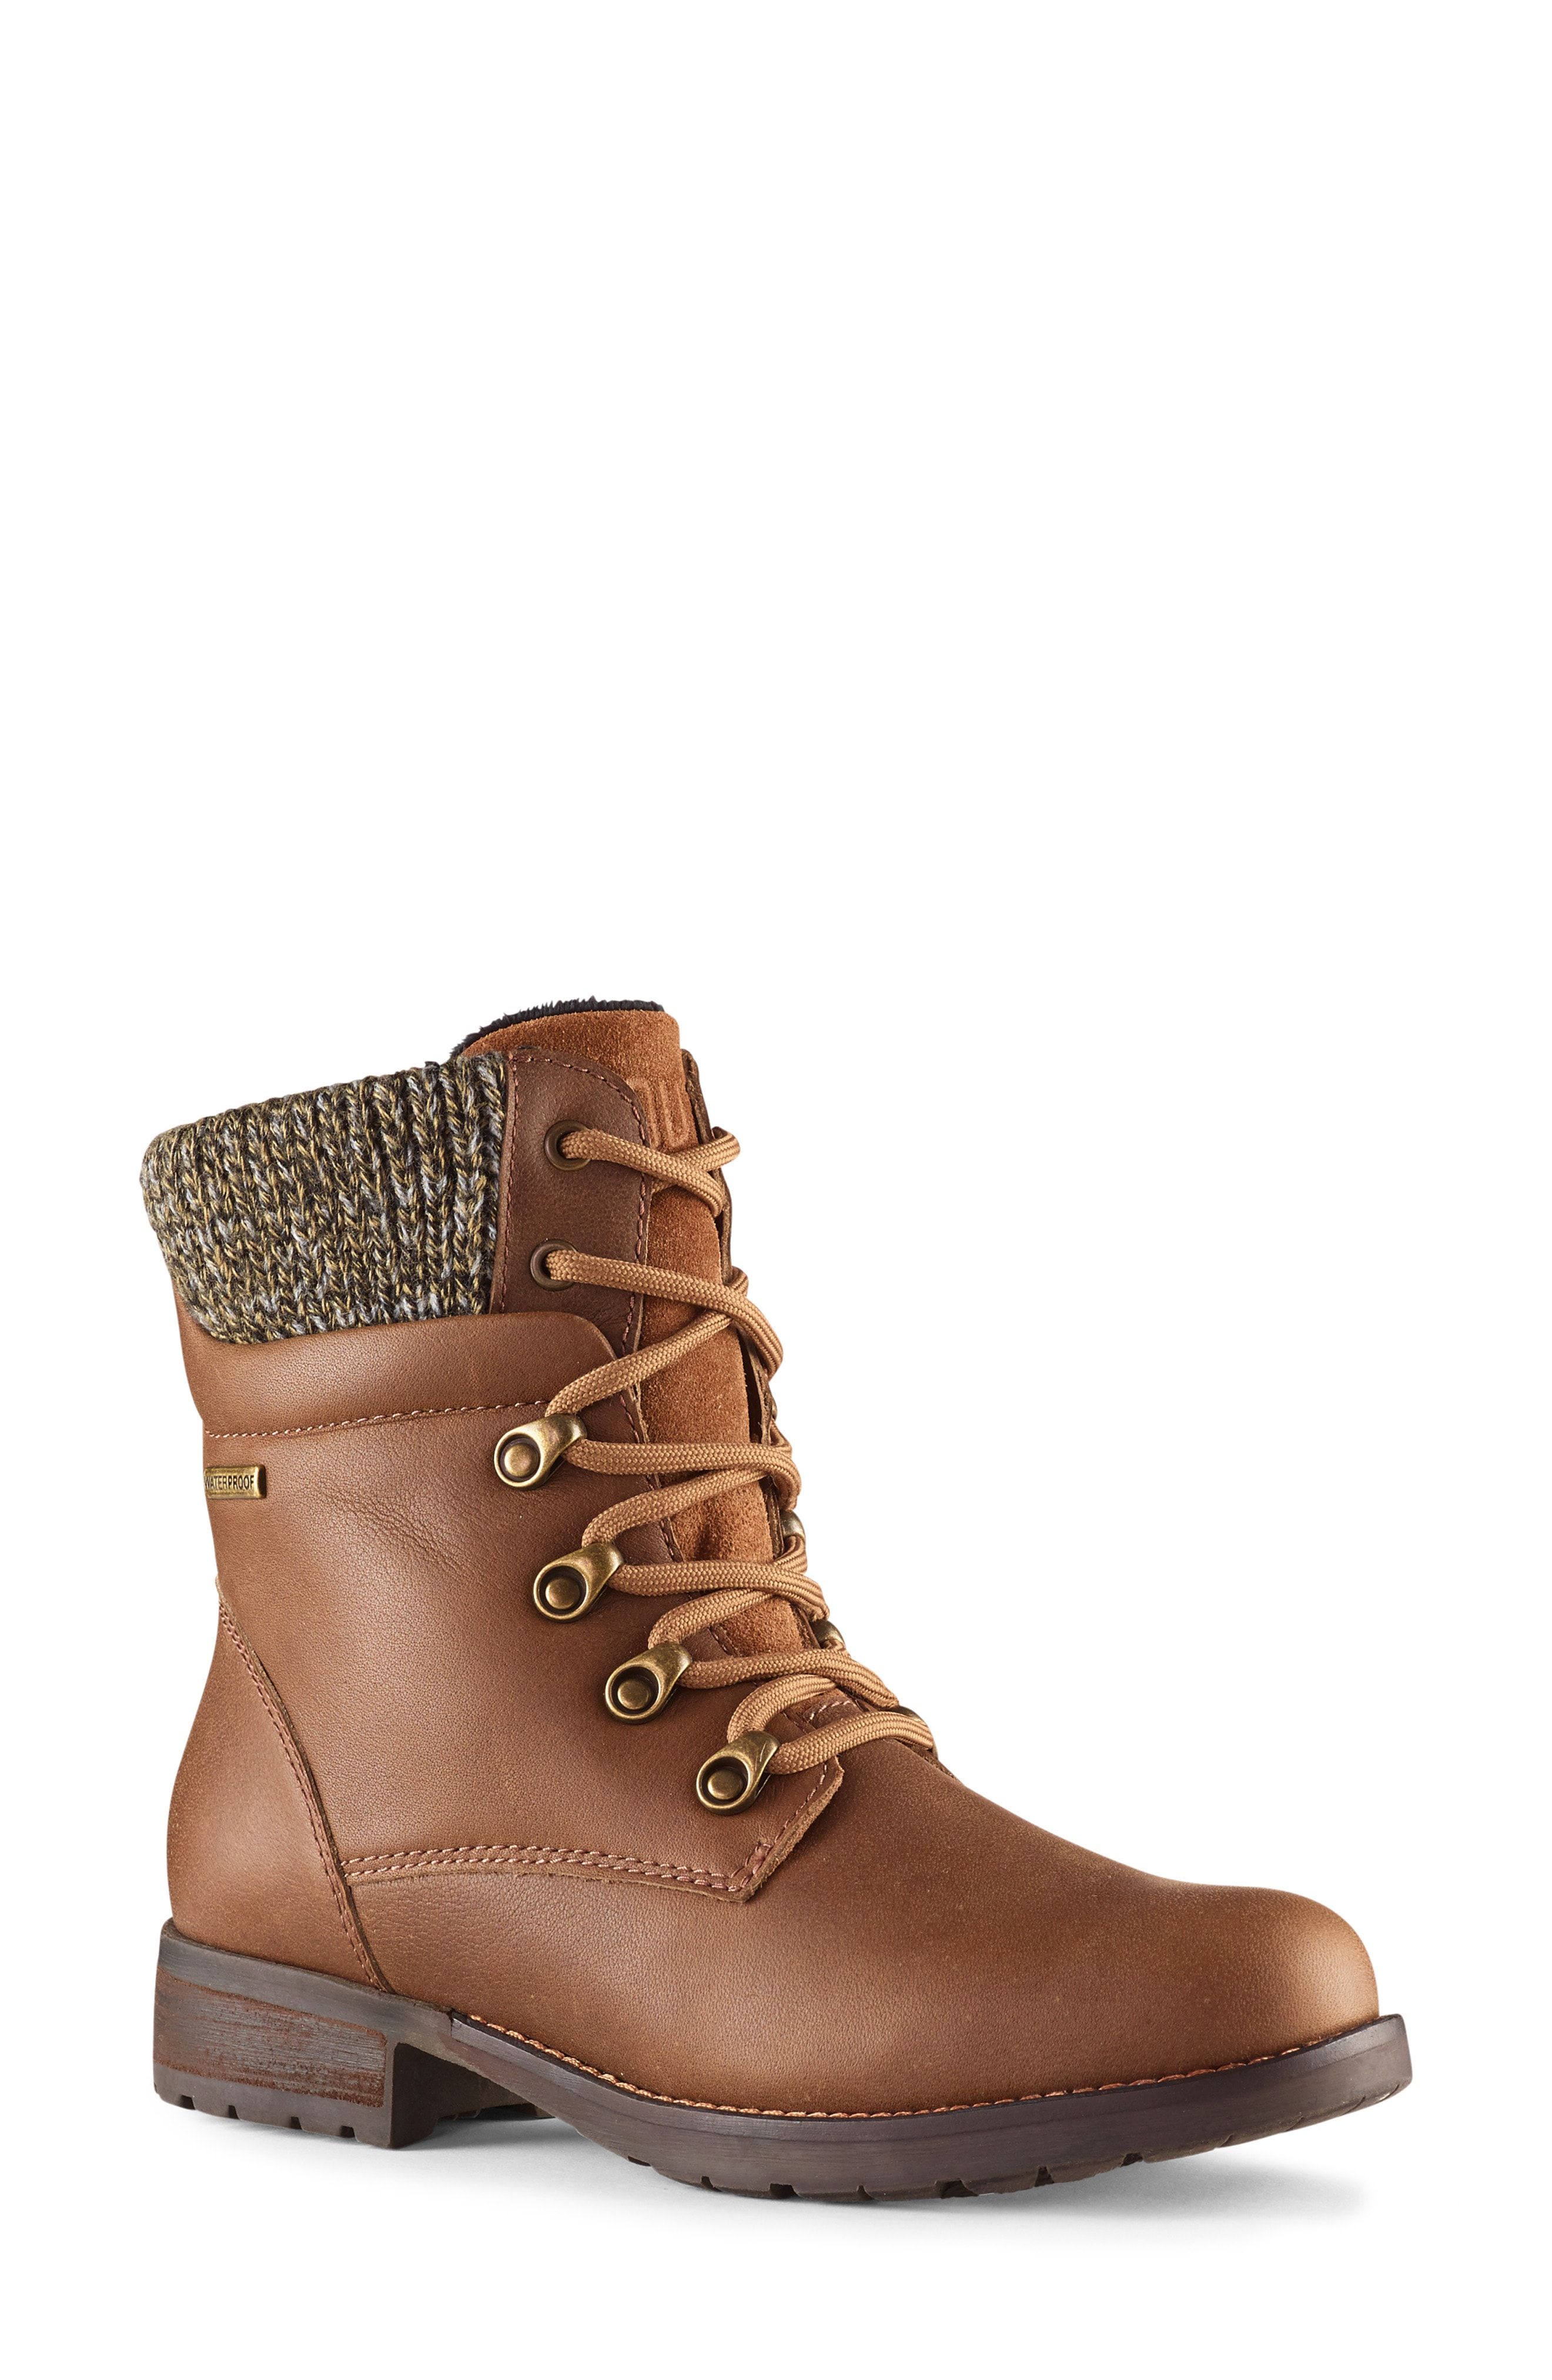 19 Cute Hiking Boots For Women 2020 